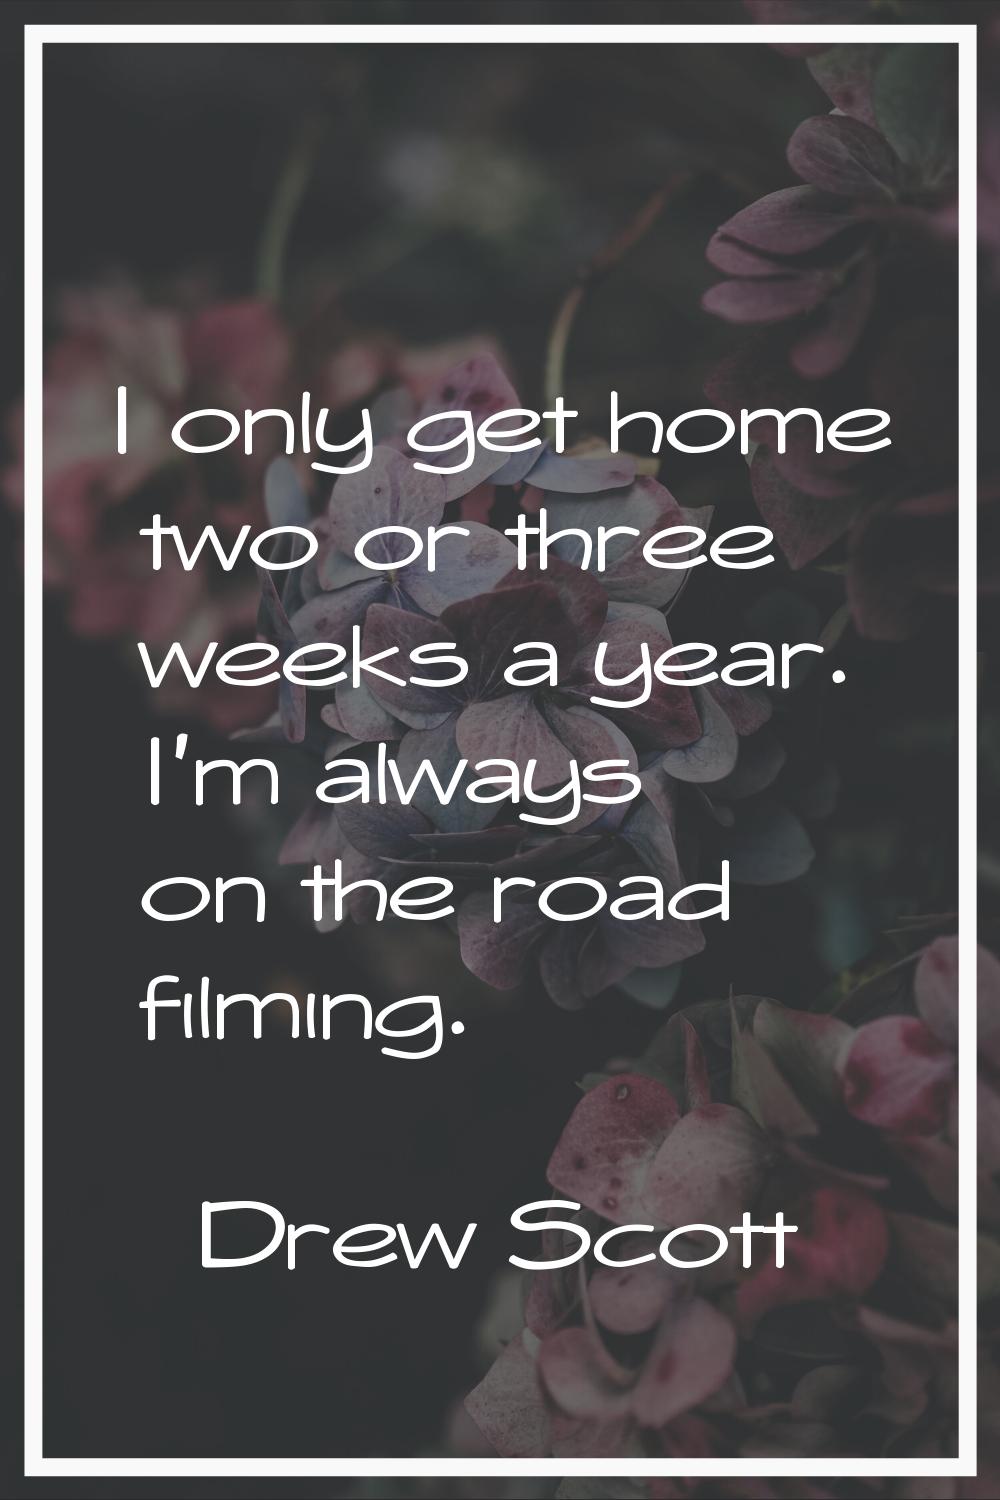 I only get home two or three weeks a year. I'm always on the road filming.